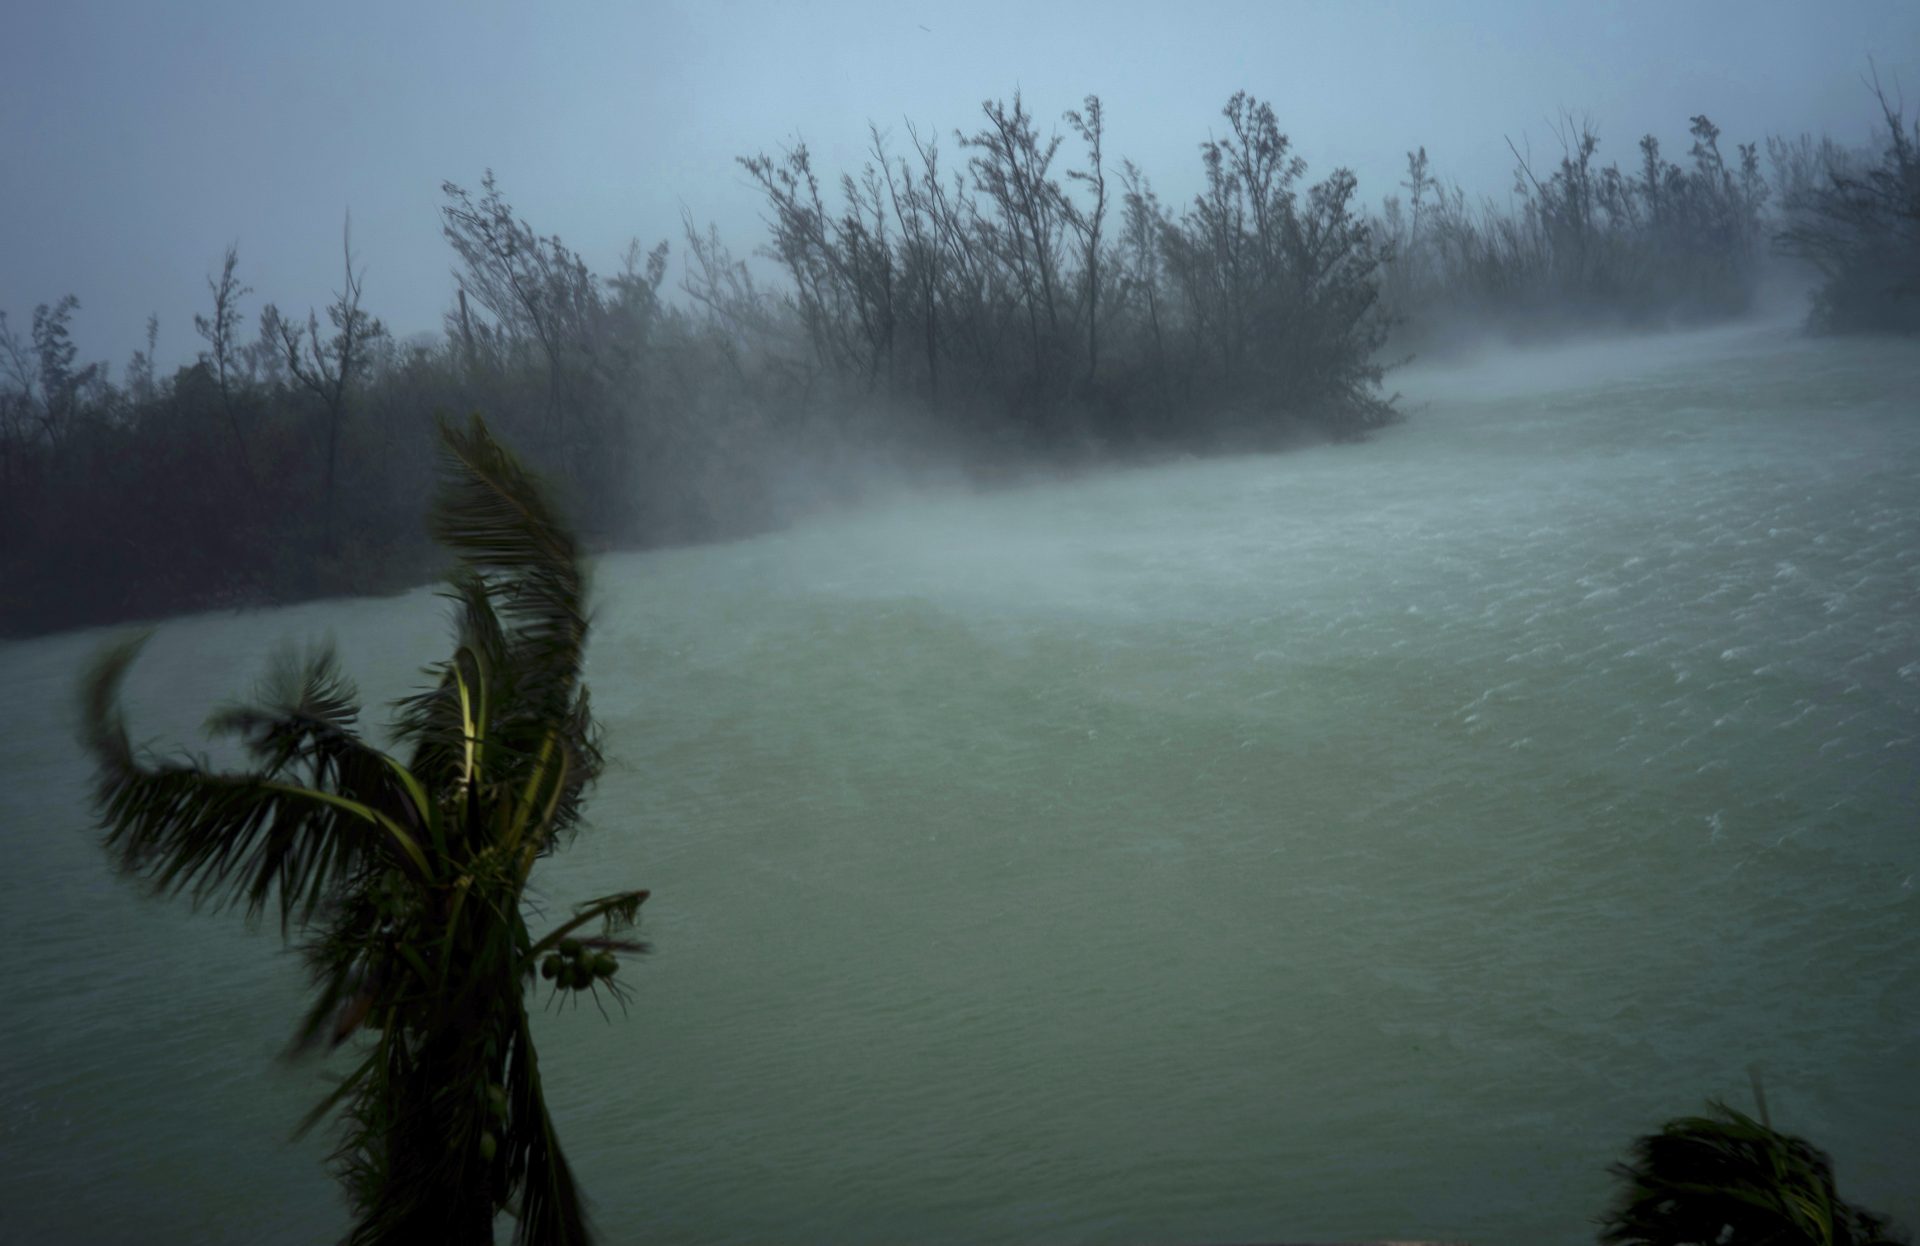 Strong winds from Hurricane Dorian blow the tops of trees and brush while whisking up water from the surface of a canal that leads to the sea, located behind the brush at top, seen from the balcony of a hotel in Freeport, Grand Bahama, Bahamas, Monday, Sept. 2, 2019. Hurricane Dorian hovered over the Bahamas on Monday, pummeling the islands with a fearsome Category 4 assault that forced even rescue crews to take shelter until the onslaught passes.